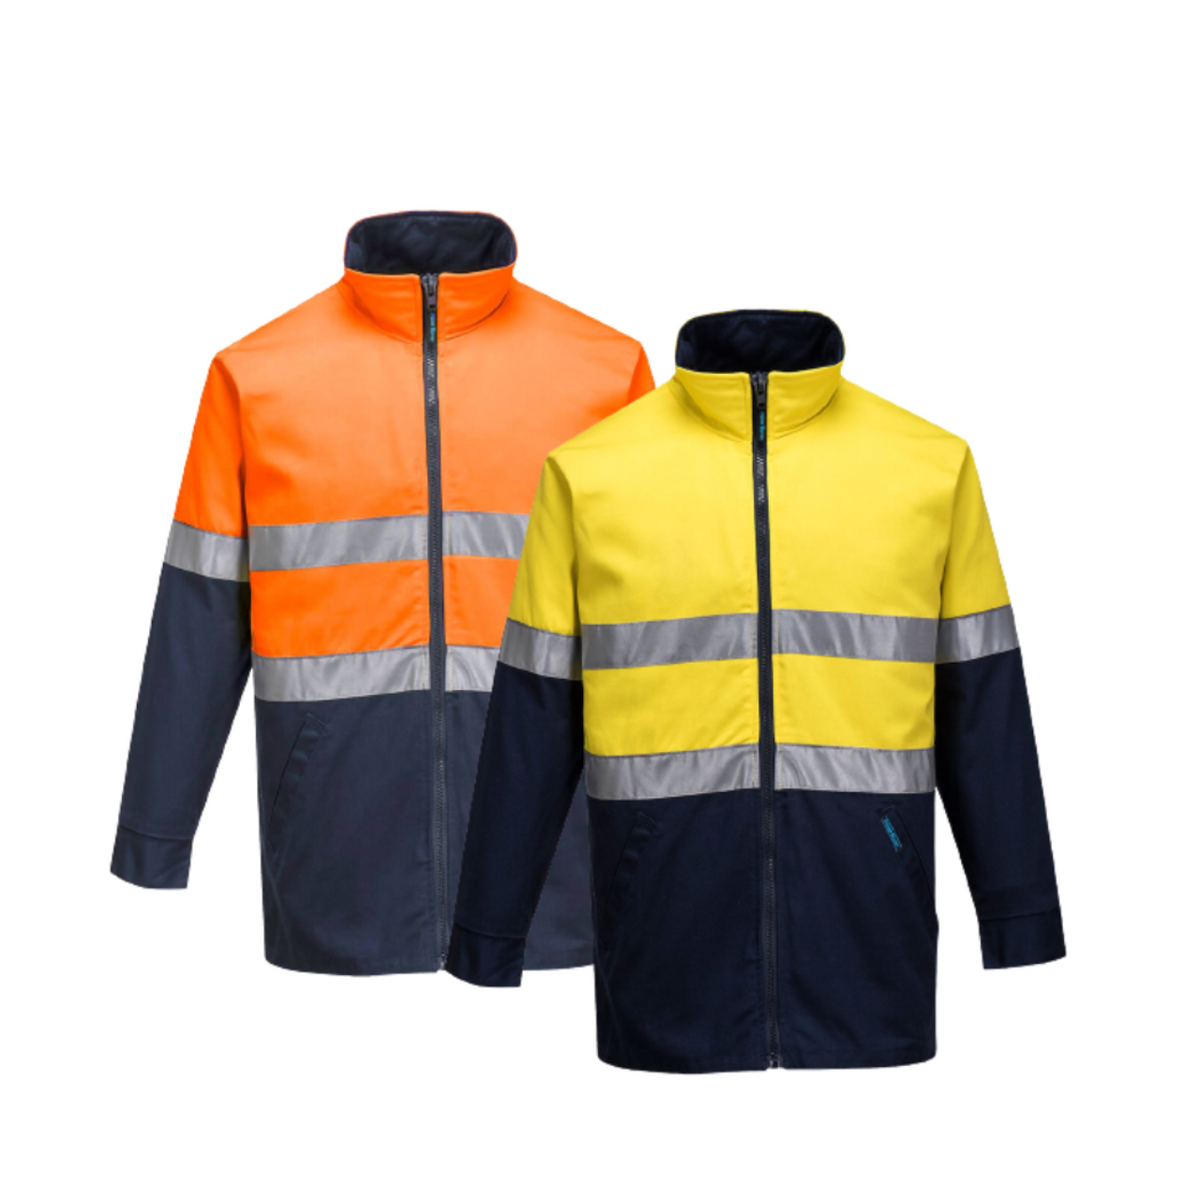 Portwest Hume 100% Cotton Drill Jacket 2 Tone Reflective Work Safety MJ998-Collins Clothing Co